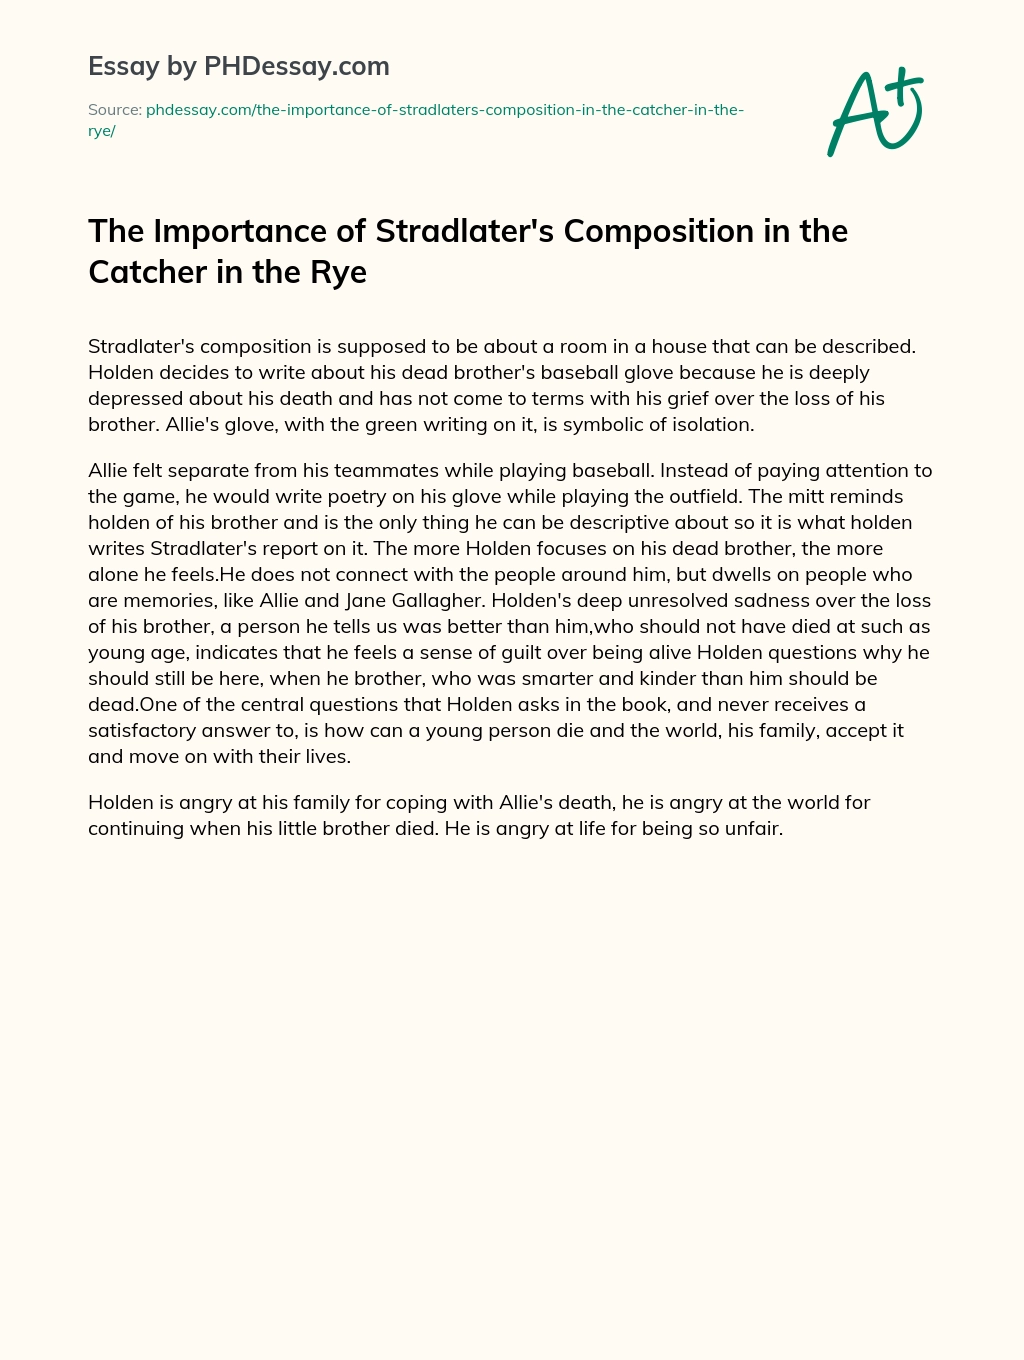 The Importance of Stradlater’s Composition in the Catcher in the Rye essay